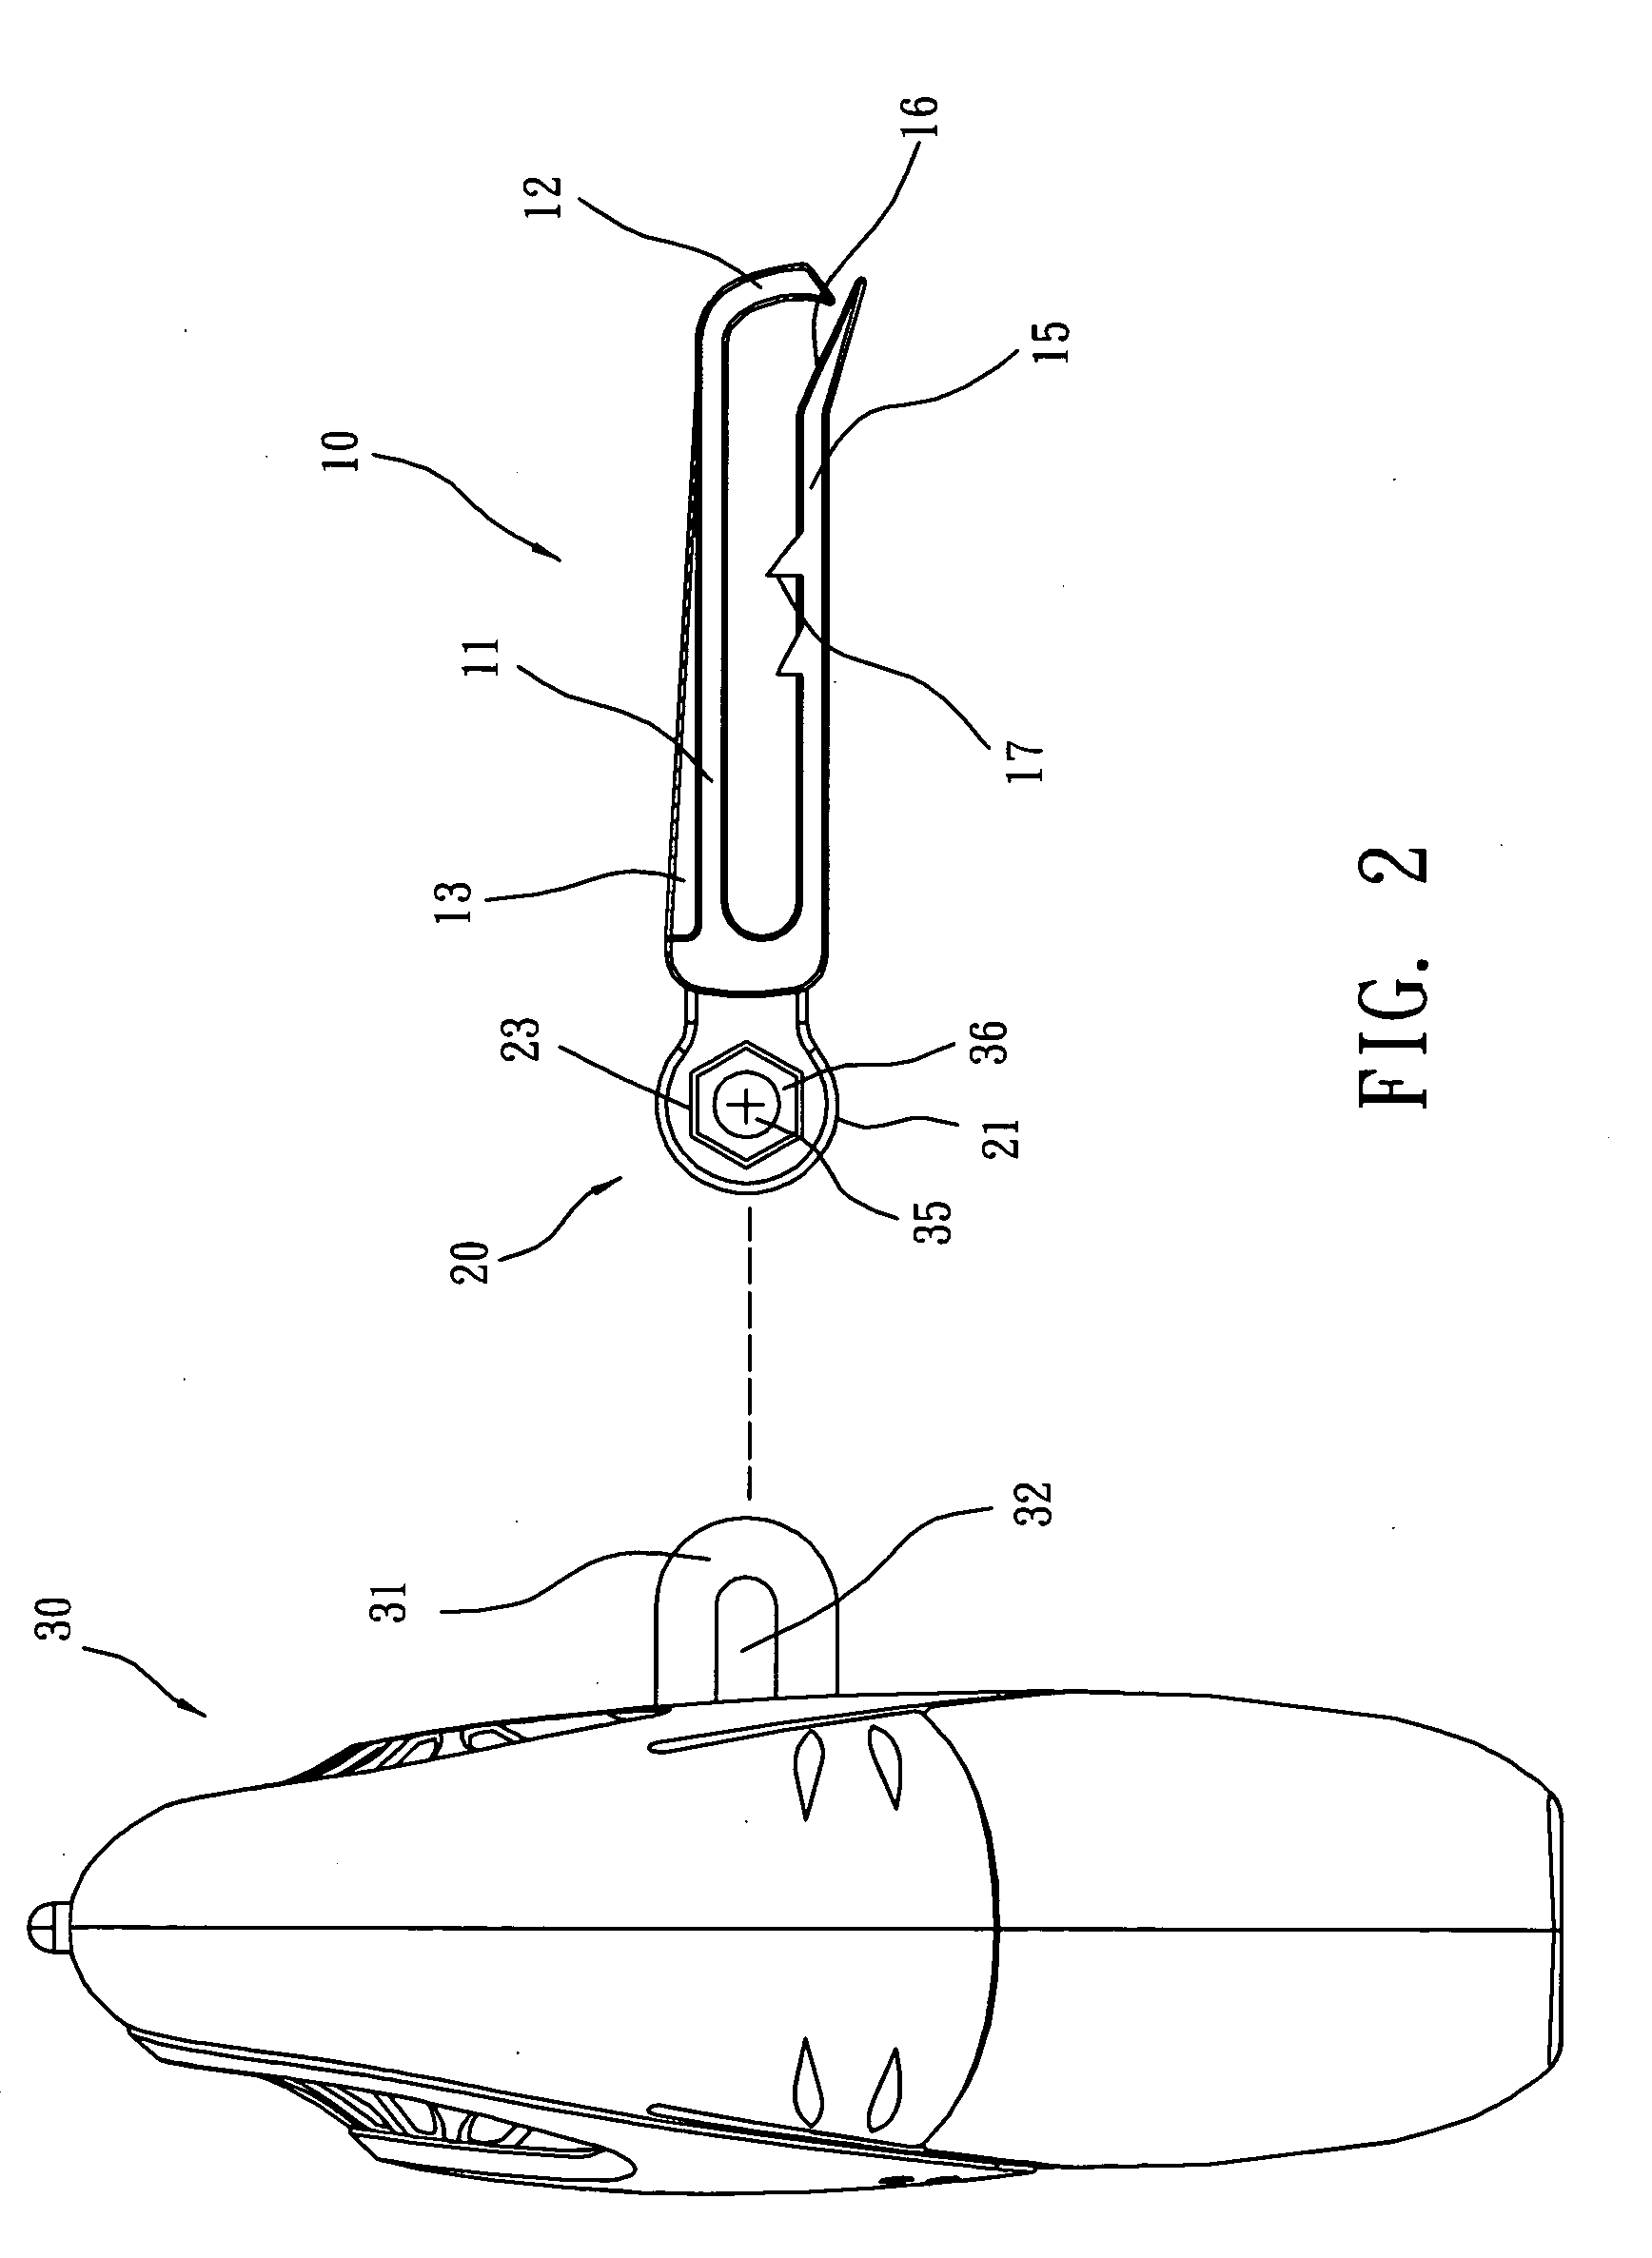 Retaining clip for attaching a fragrance container to a cool air vent of an air conditioner